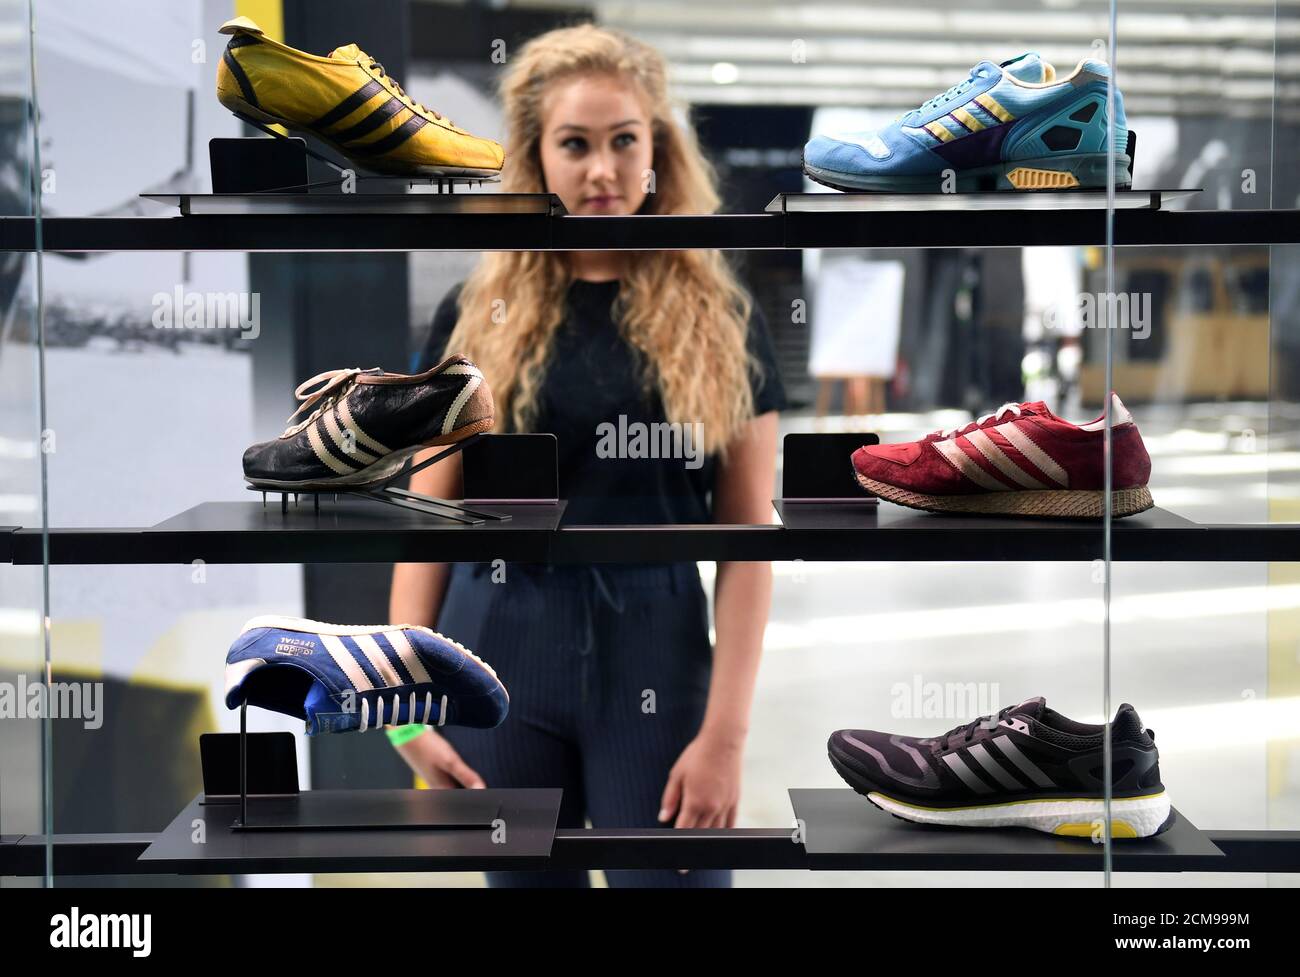 A woman poses in front of displayed Adidas shoes during celebrations for  German sports apparel maker Adidas' 70th anniversary at the company's  history exhibition in Herzogenaurach, Germany, August 9, 2019.  REUTERS/Andreas Gebert